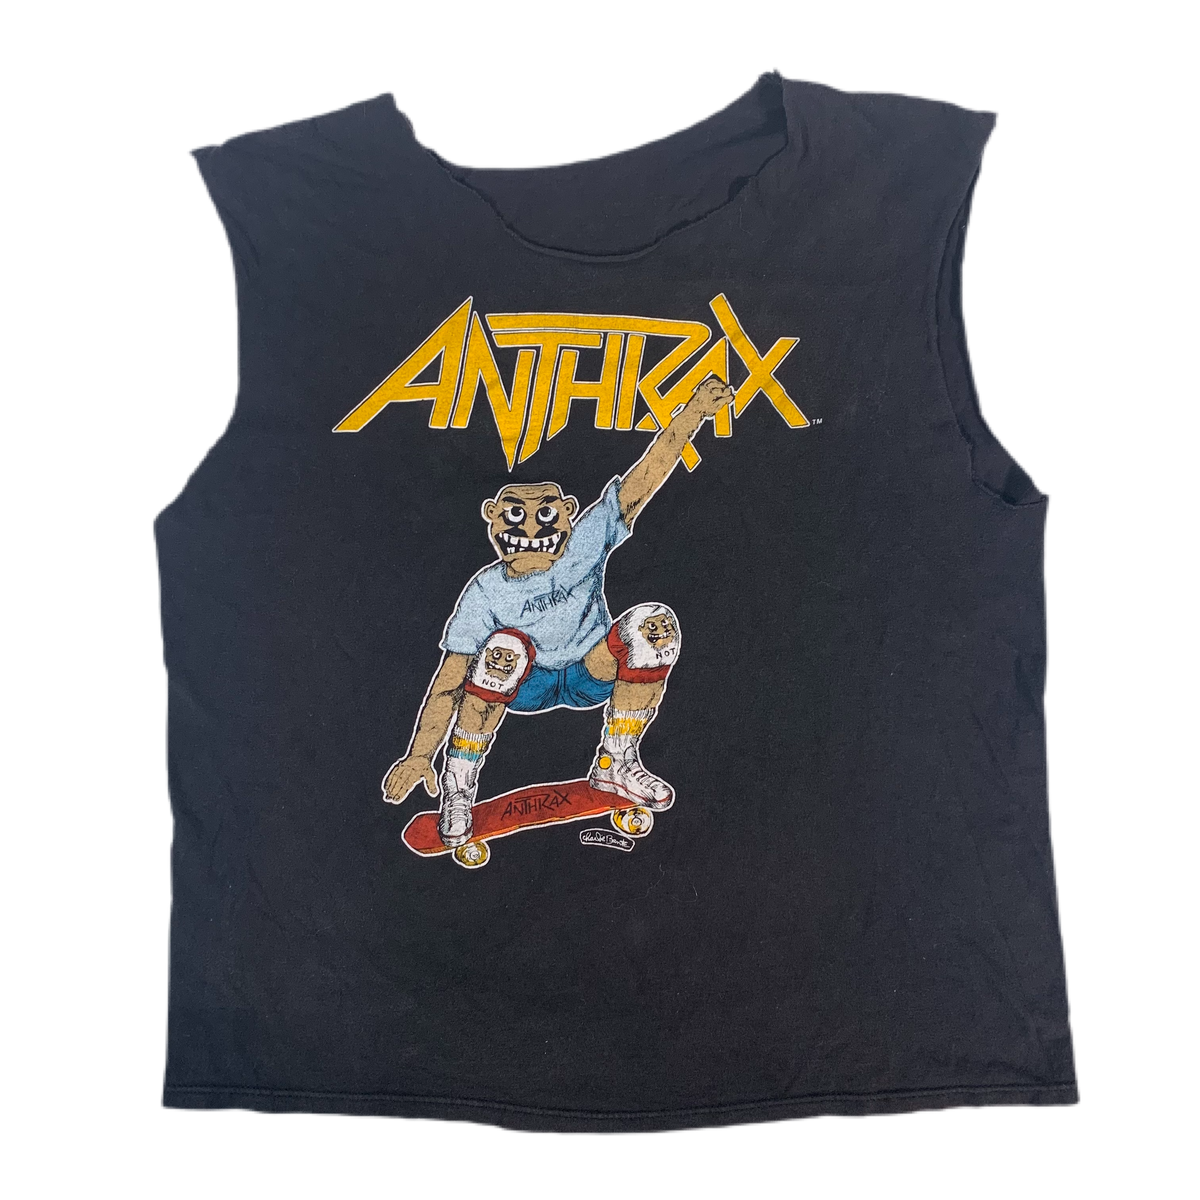 Vintage Anthrax &quot;Spreading The Disease N.Y.HC&quot; Cut Shirt